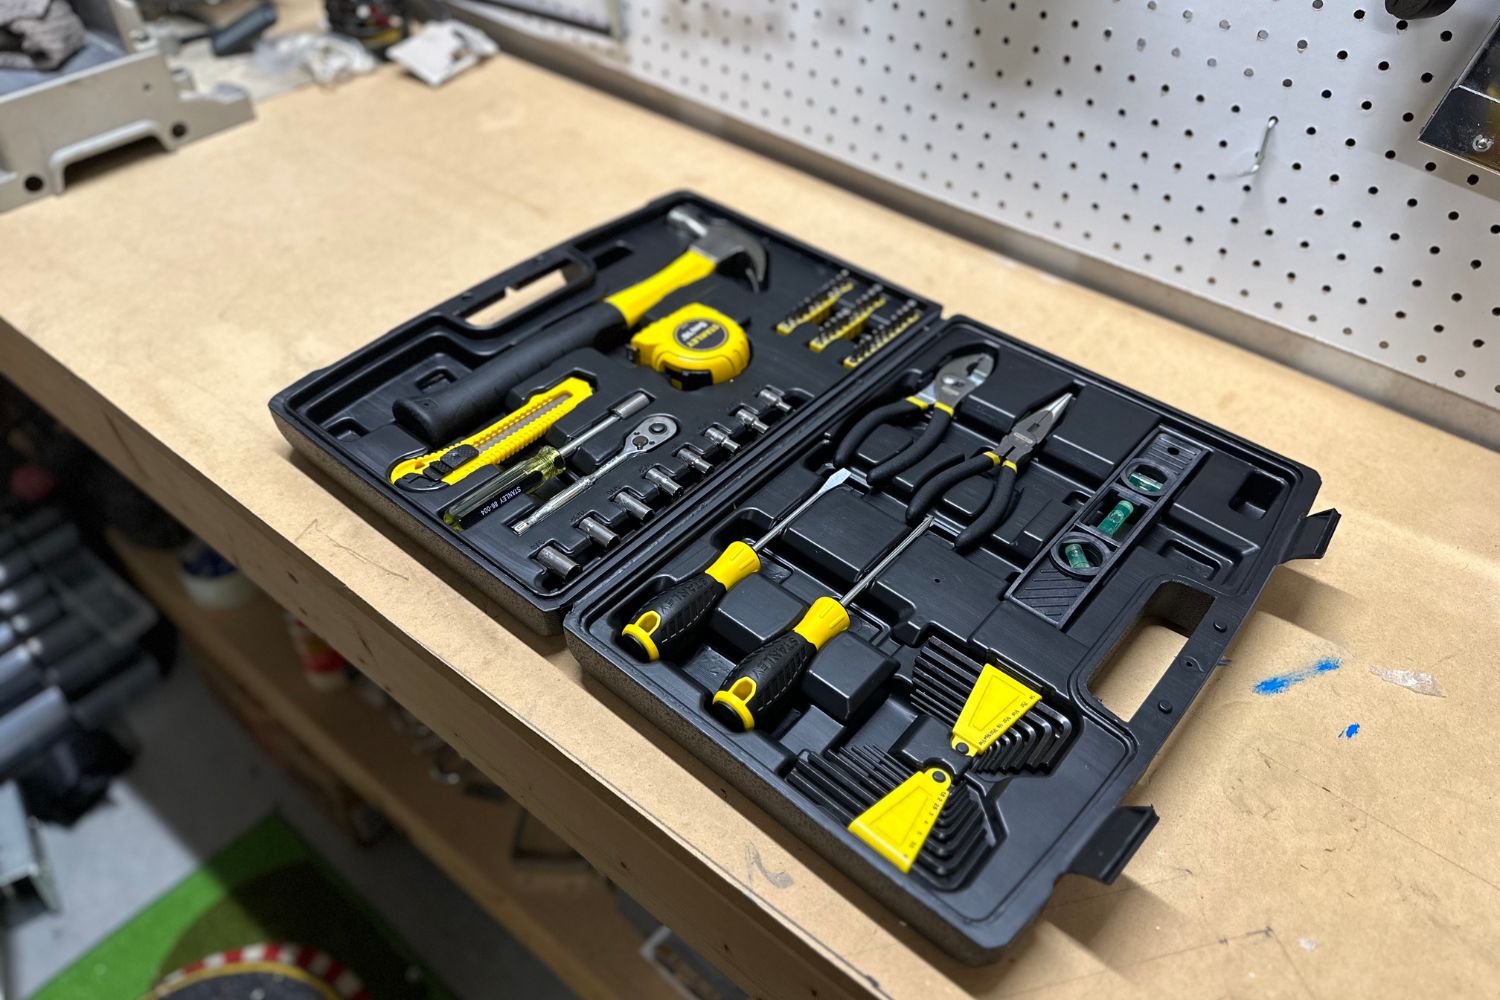 Stanley Tool Set Review